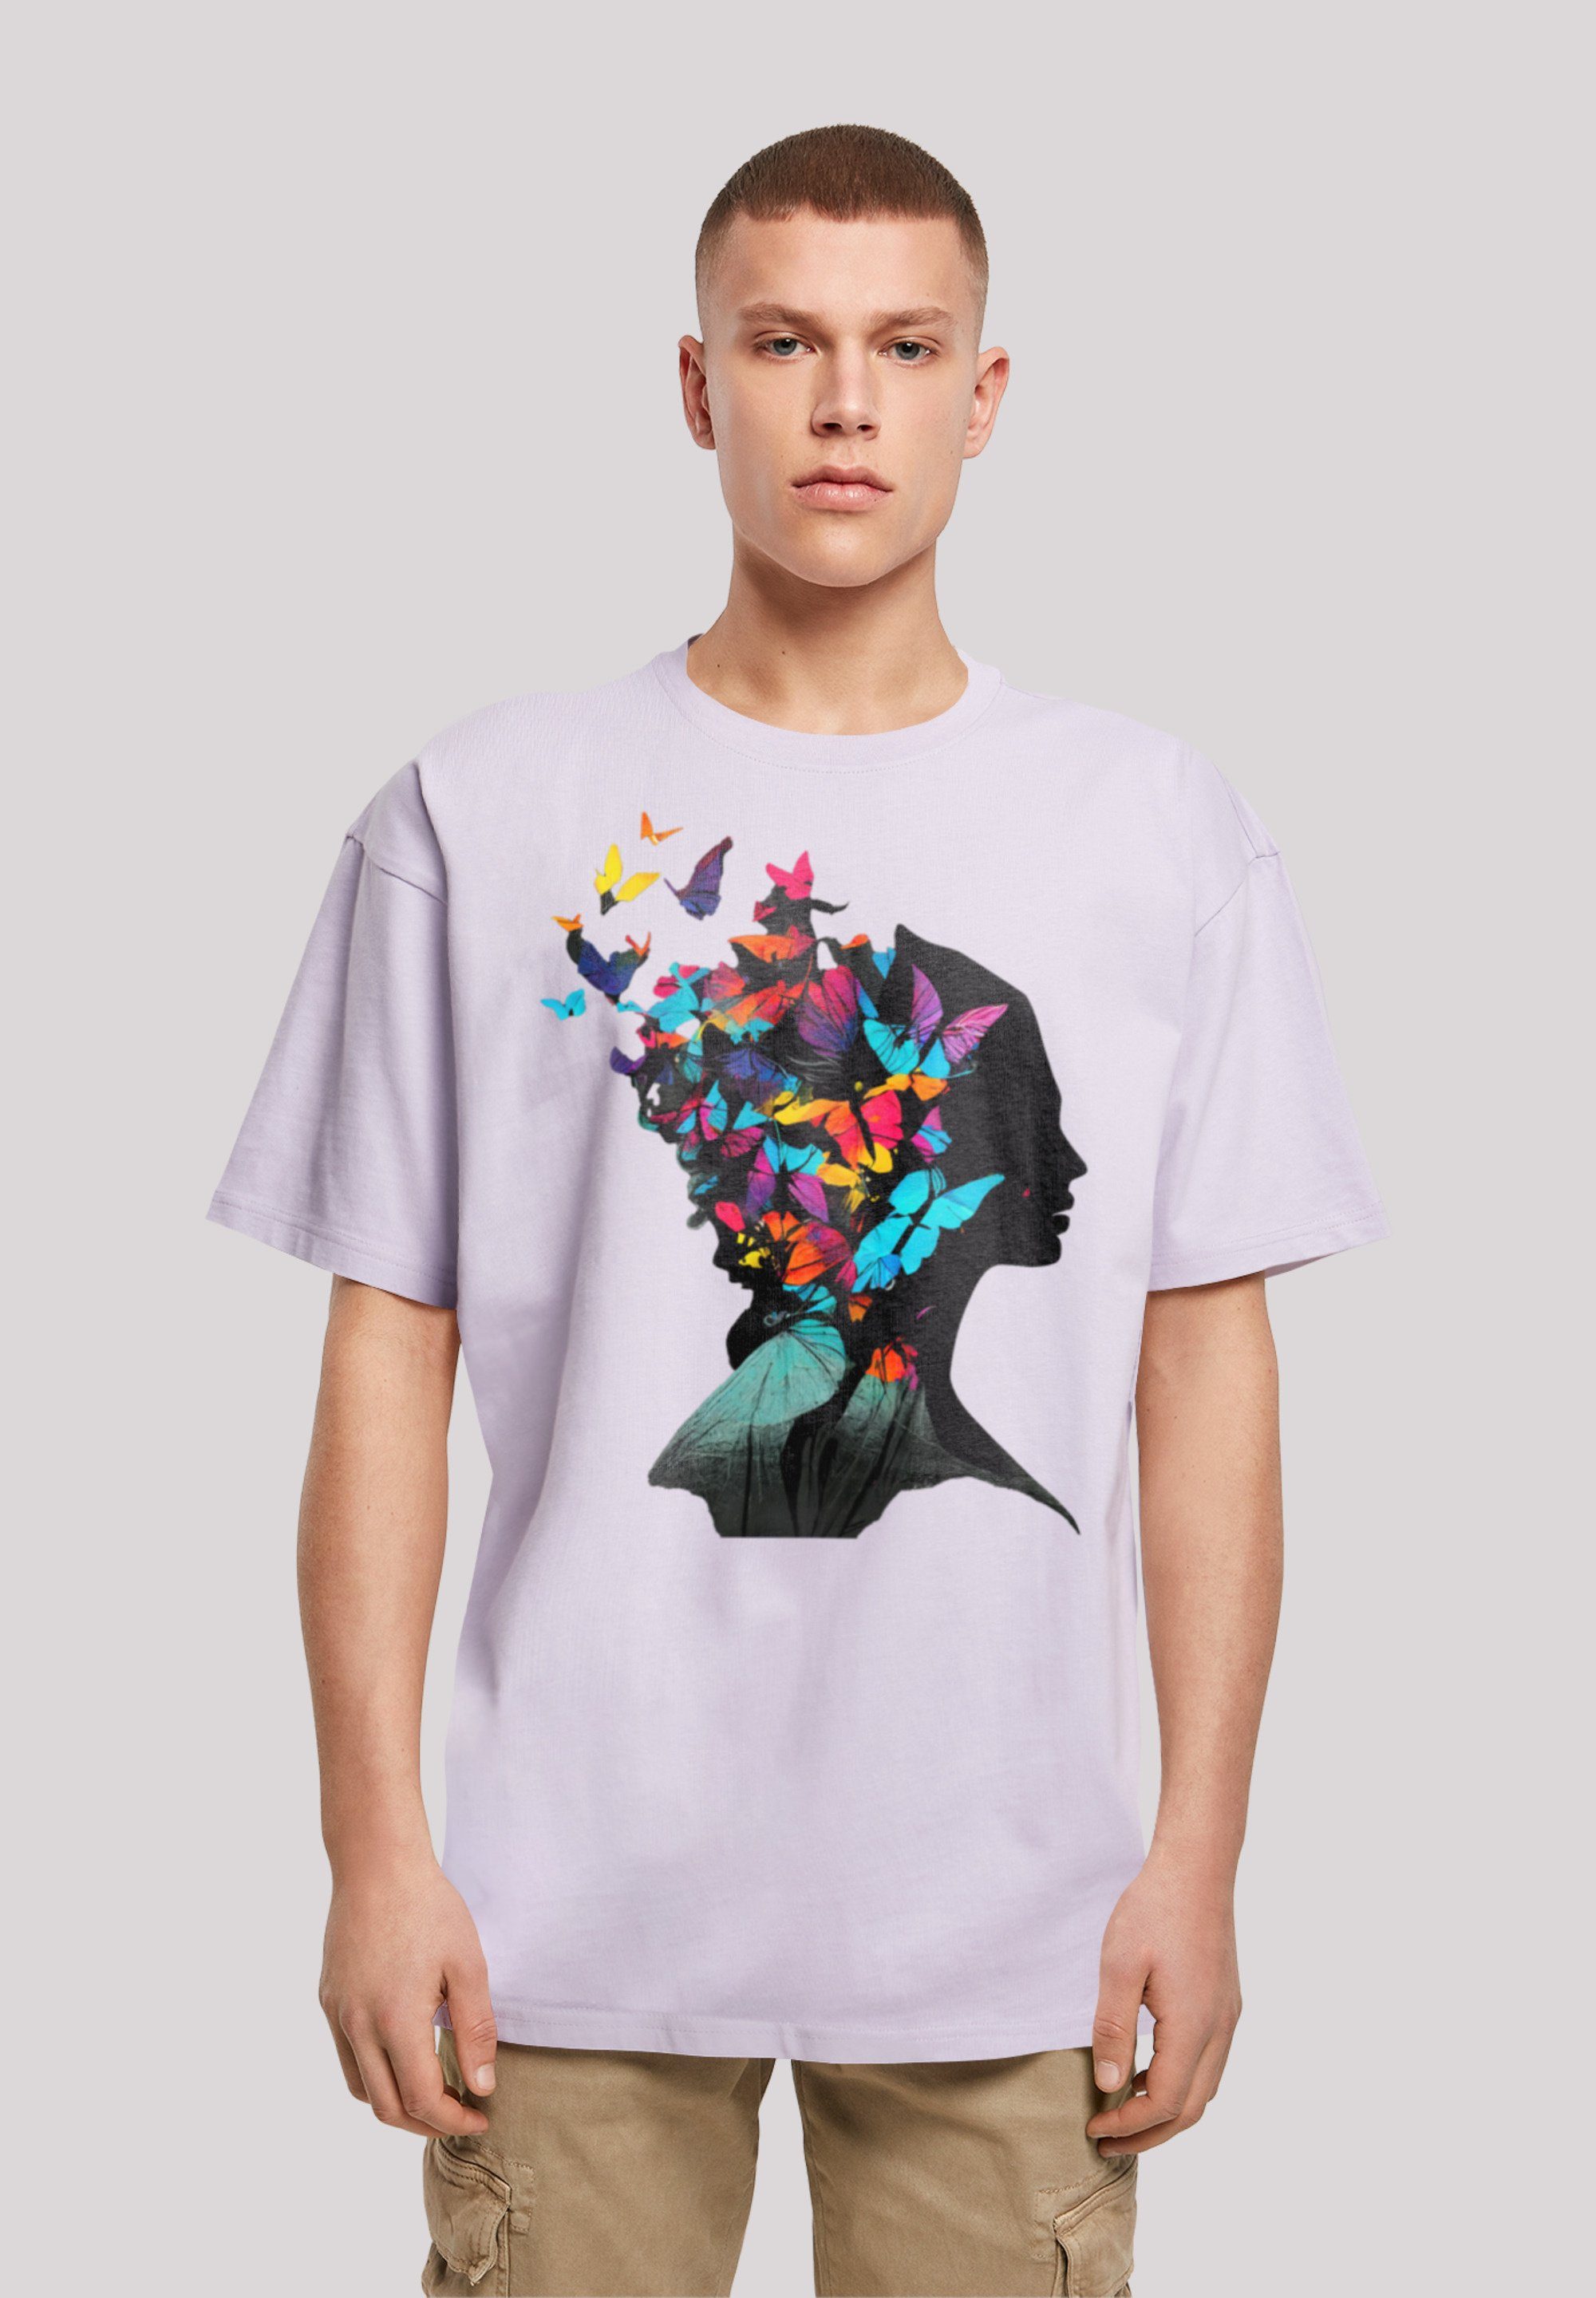 F4NT4STIC T-Shirt Schmetterling Silhouette OVERSIZE TEE Print lilac